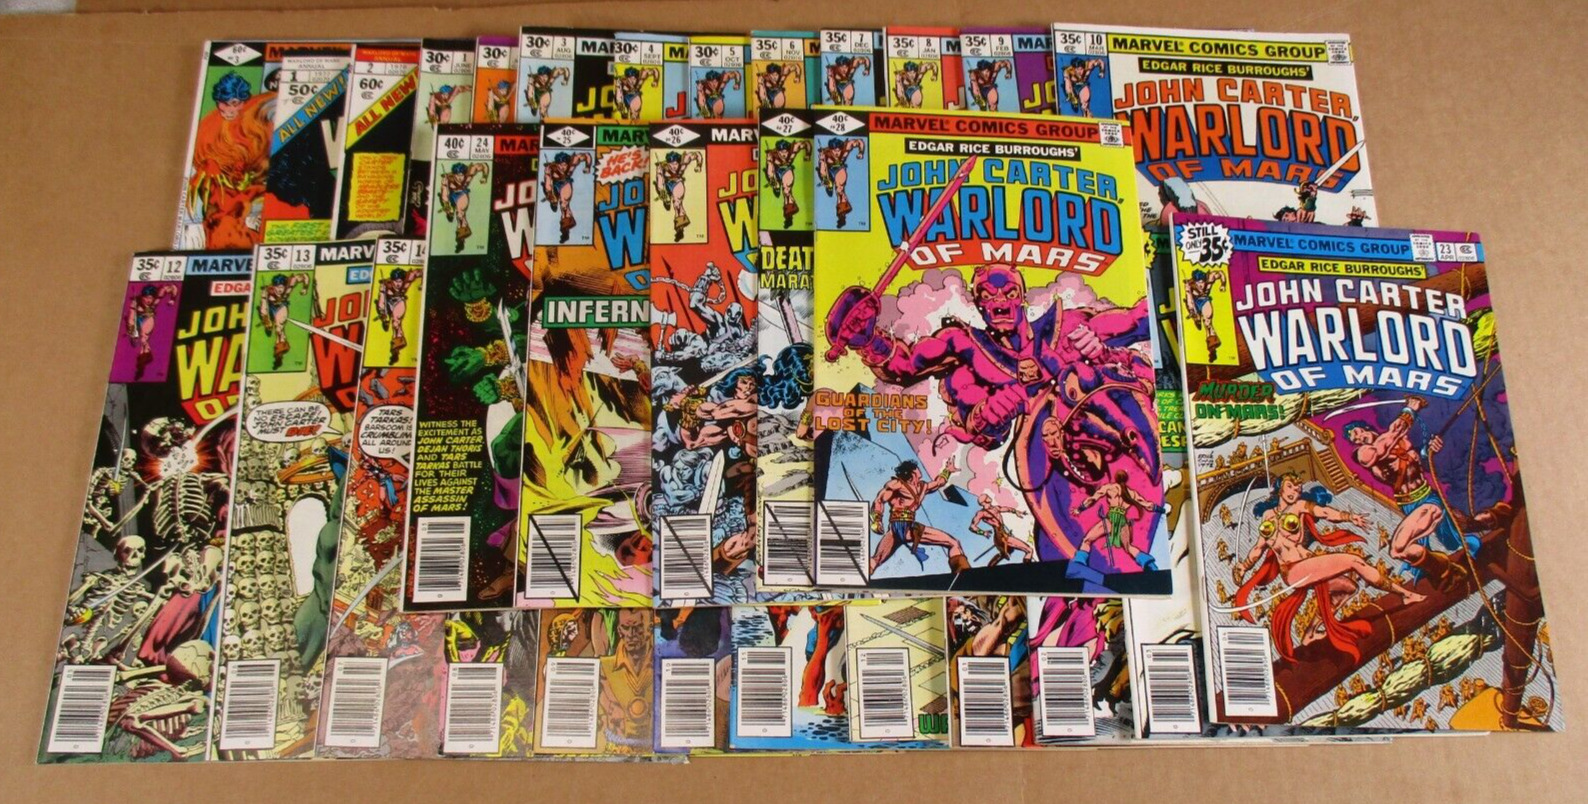 John Carter Warlord of Mars Marvel Comics 1 to 28 Run missing 11 Annuals 1 2 3